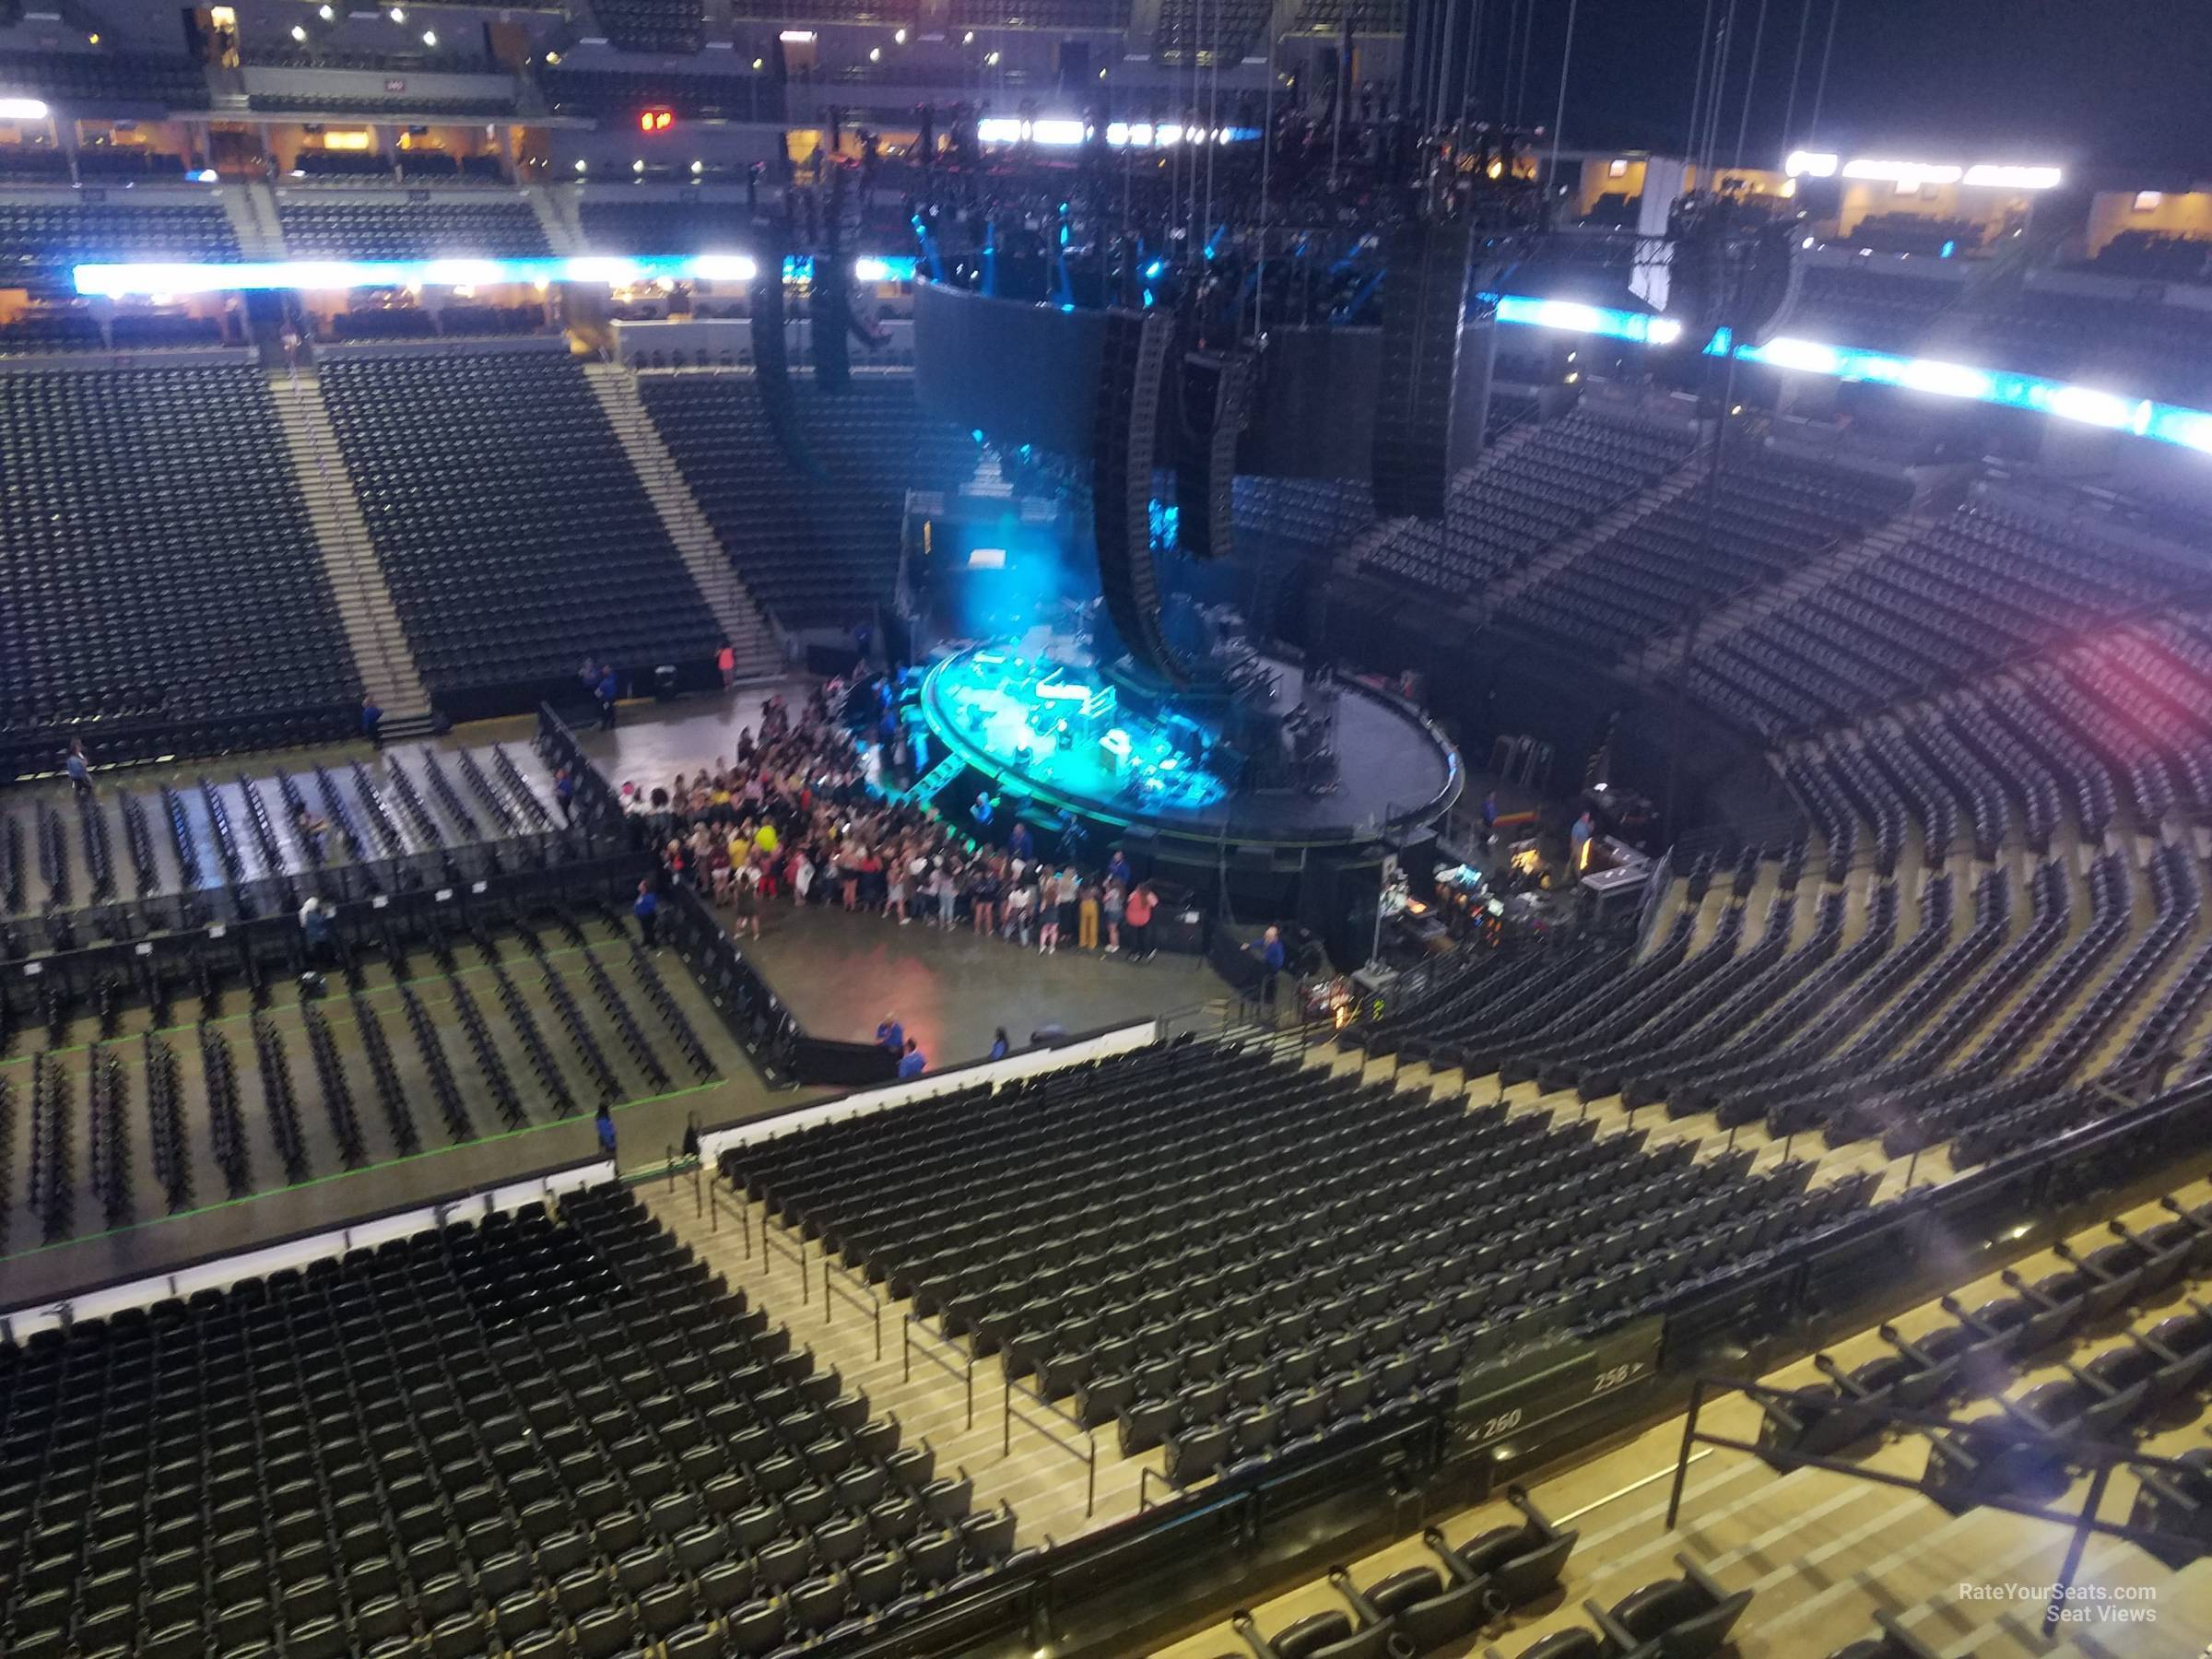 section 301, row 3 seat view  for concert - ball arena